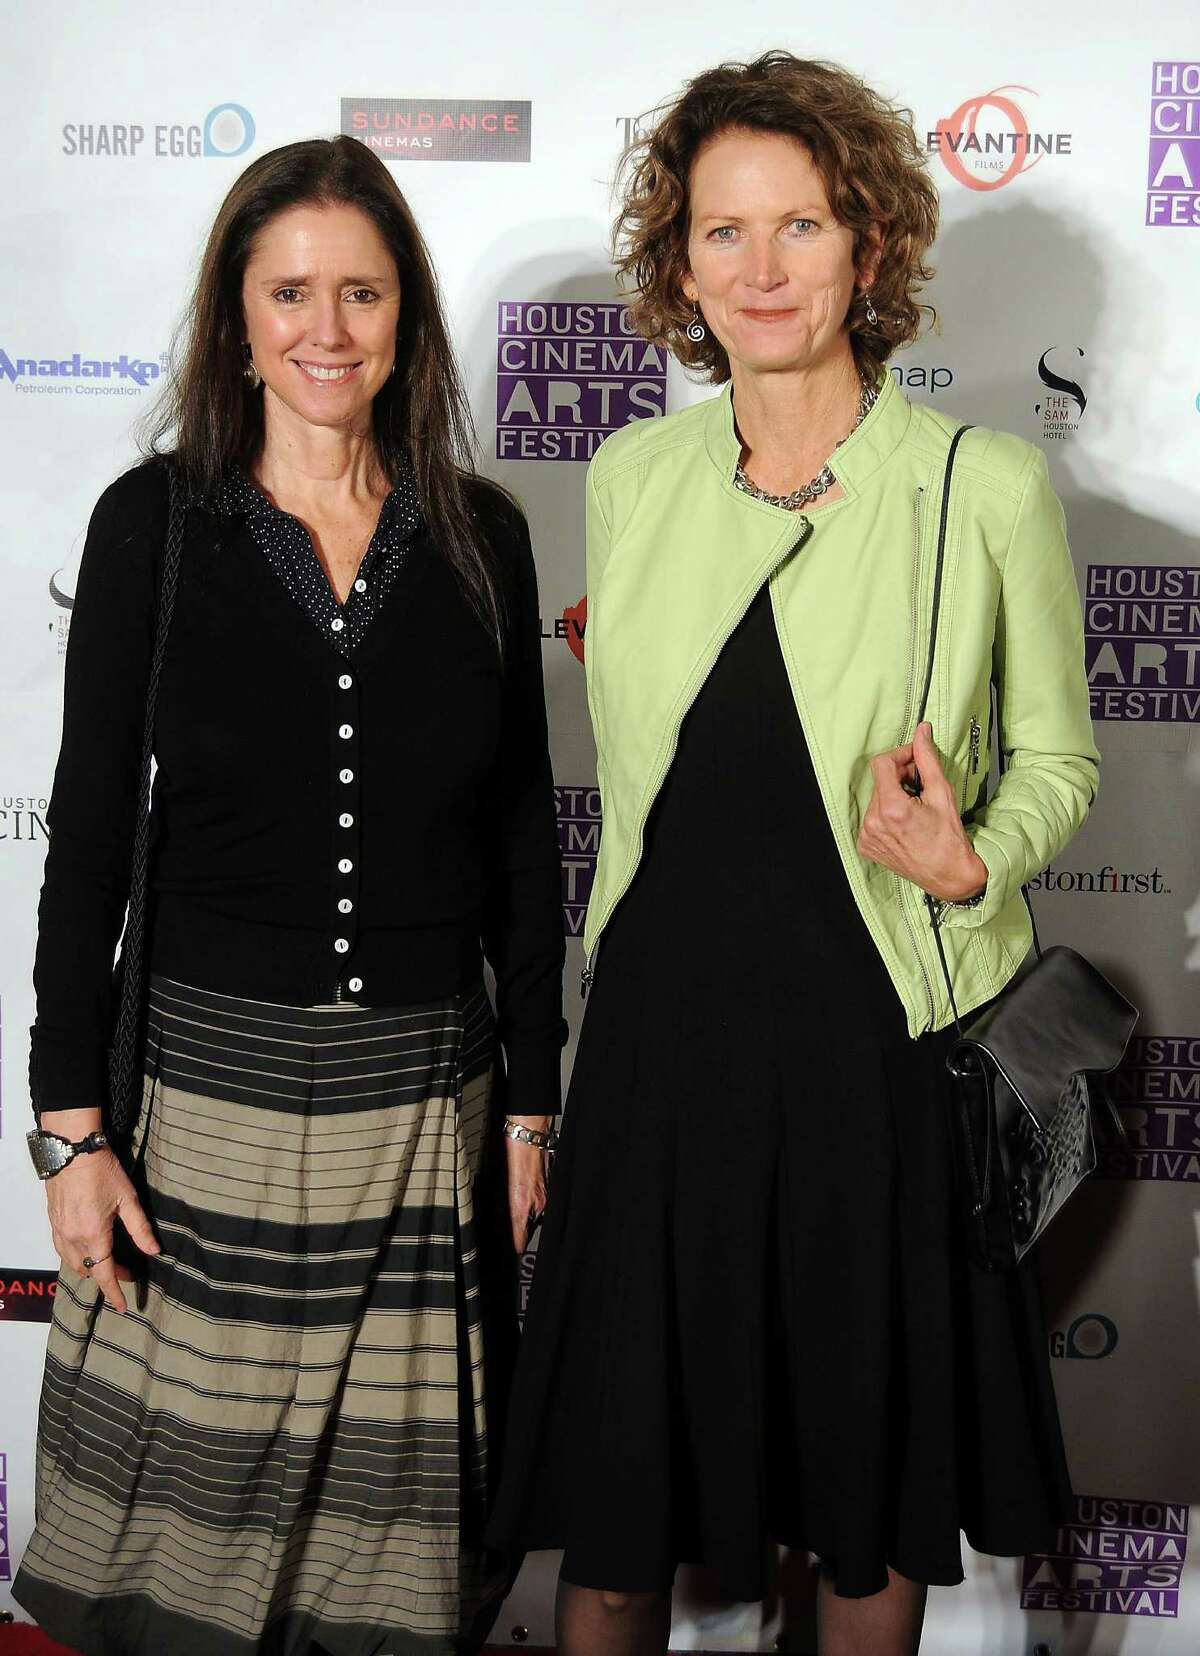 Julie Taymor and Lynn Henda on the red carpet at the opening night of the Houston Cinema Arts Festival at the Museum of Fine Arts Houston Wednesday Nov. 12, 2014.(Dave Rossman photo)